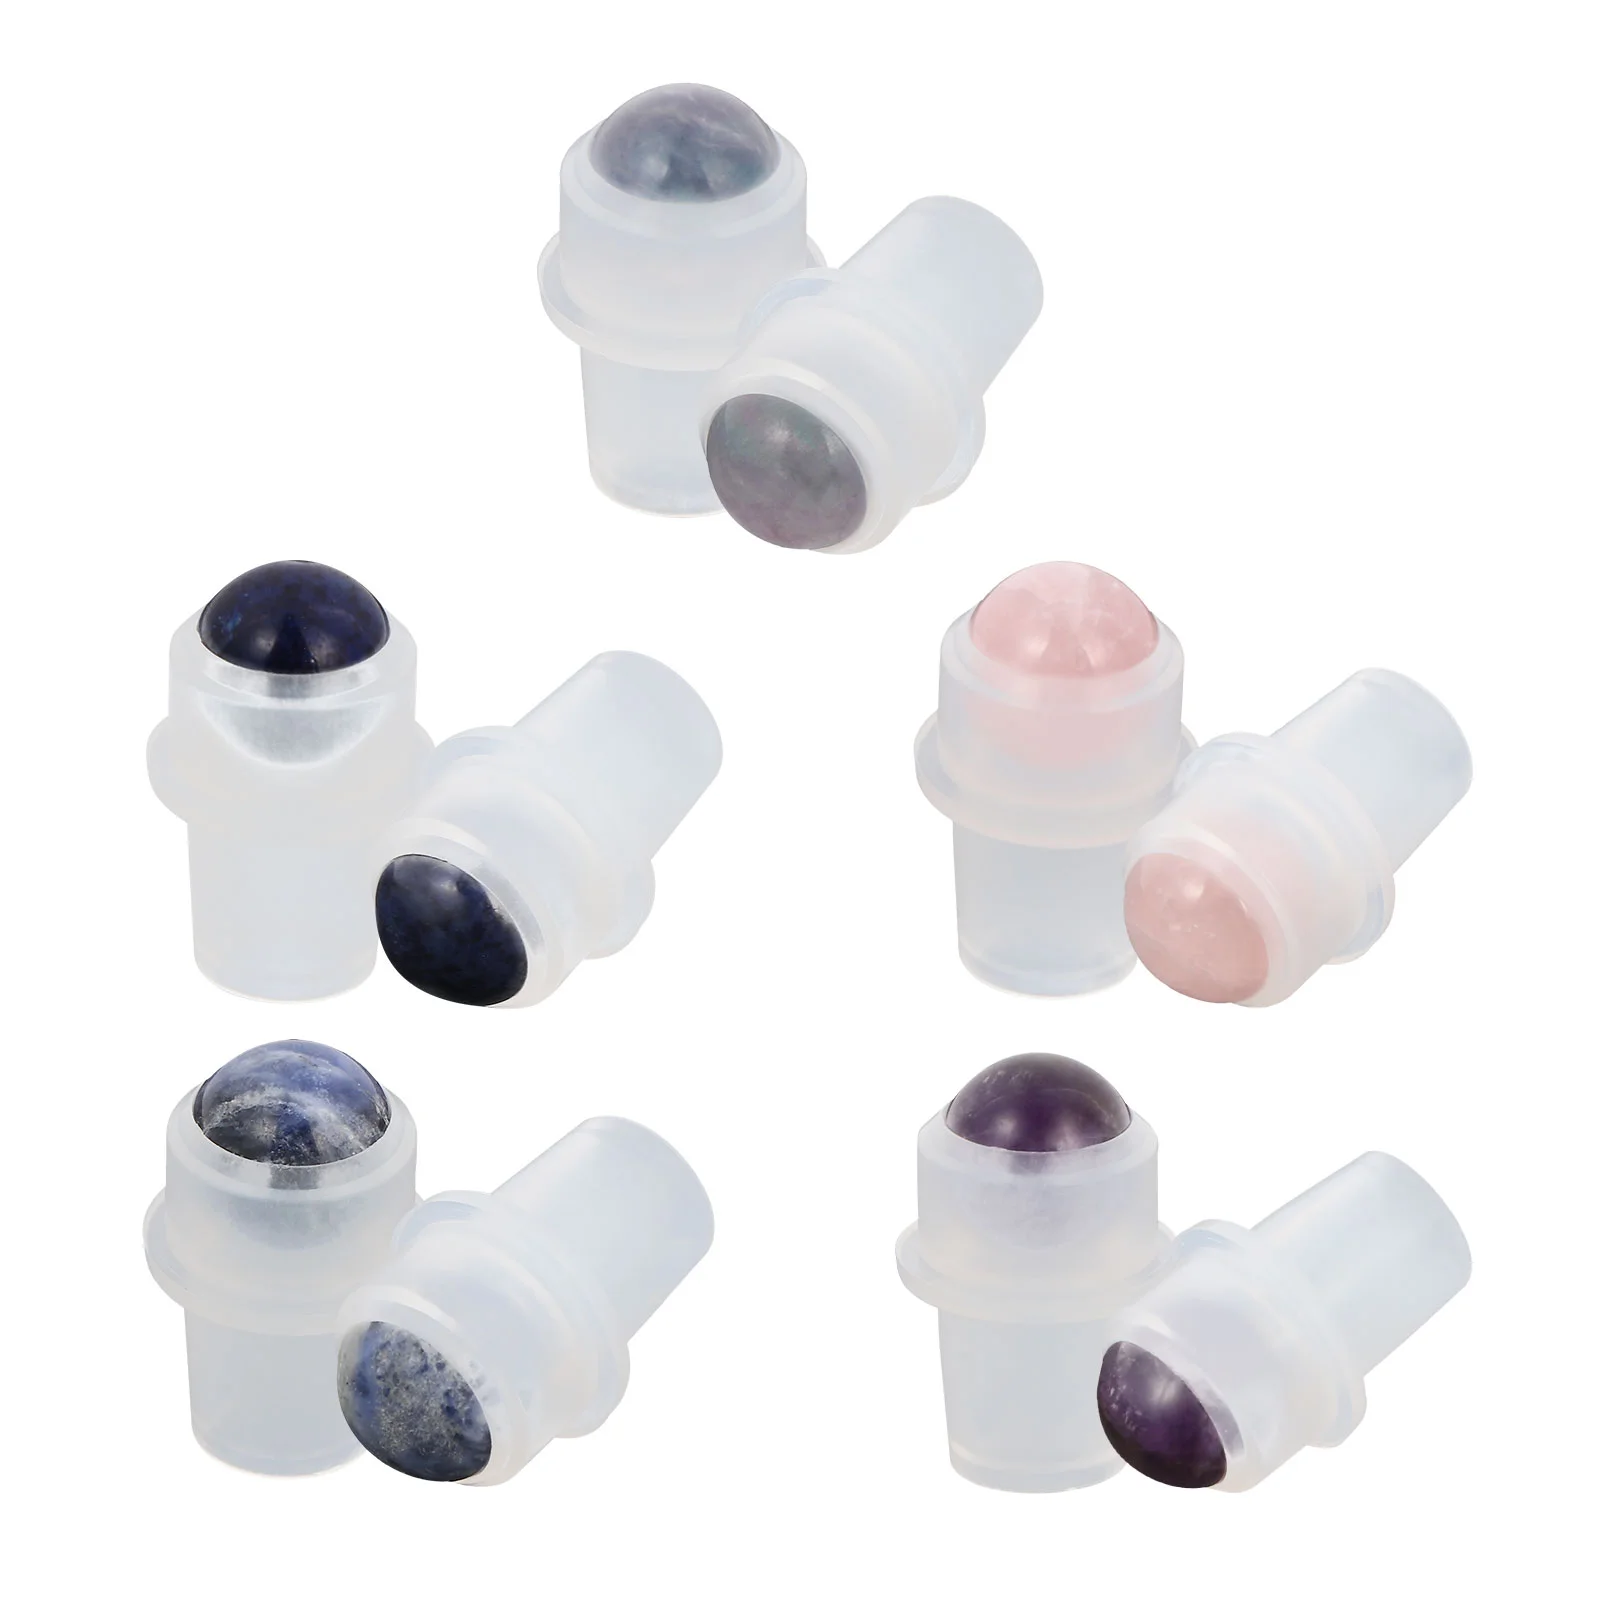 

10Pcs Semi Gemstone Roller Balls Replacement Rollers for Essential Oil Bottles